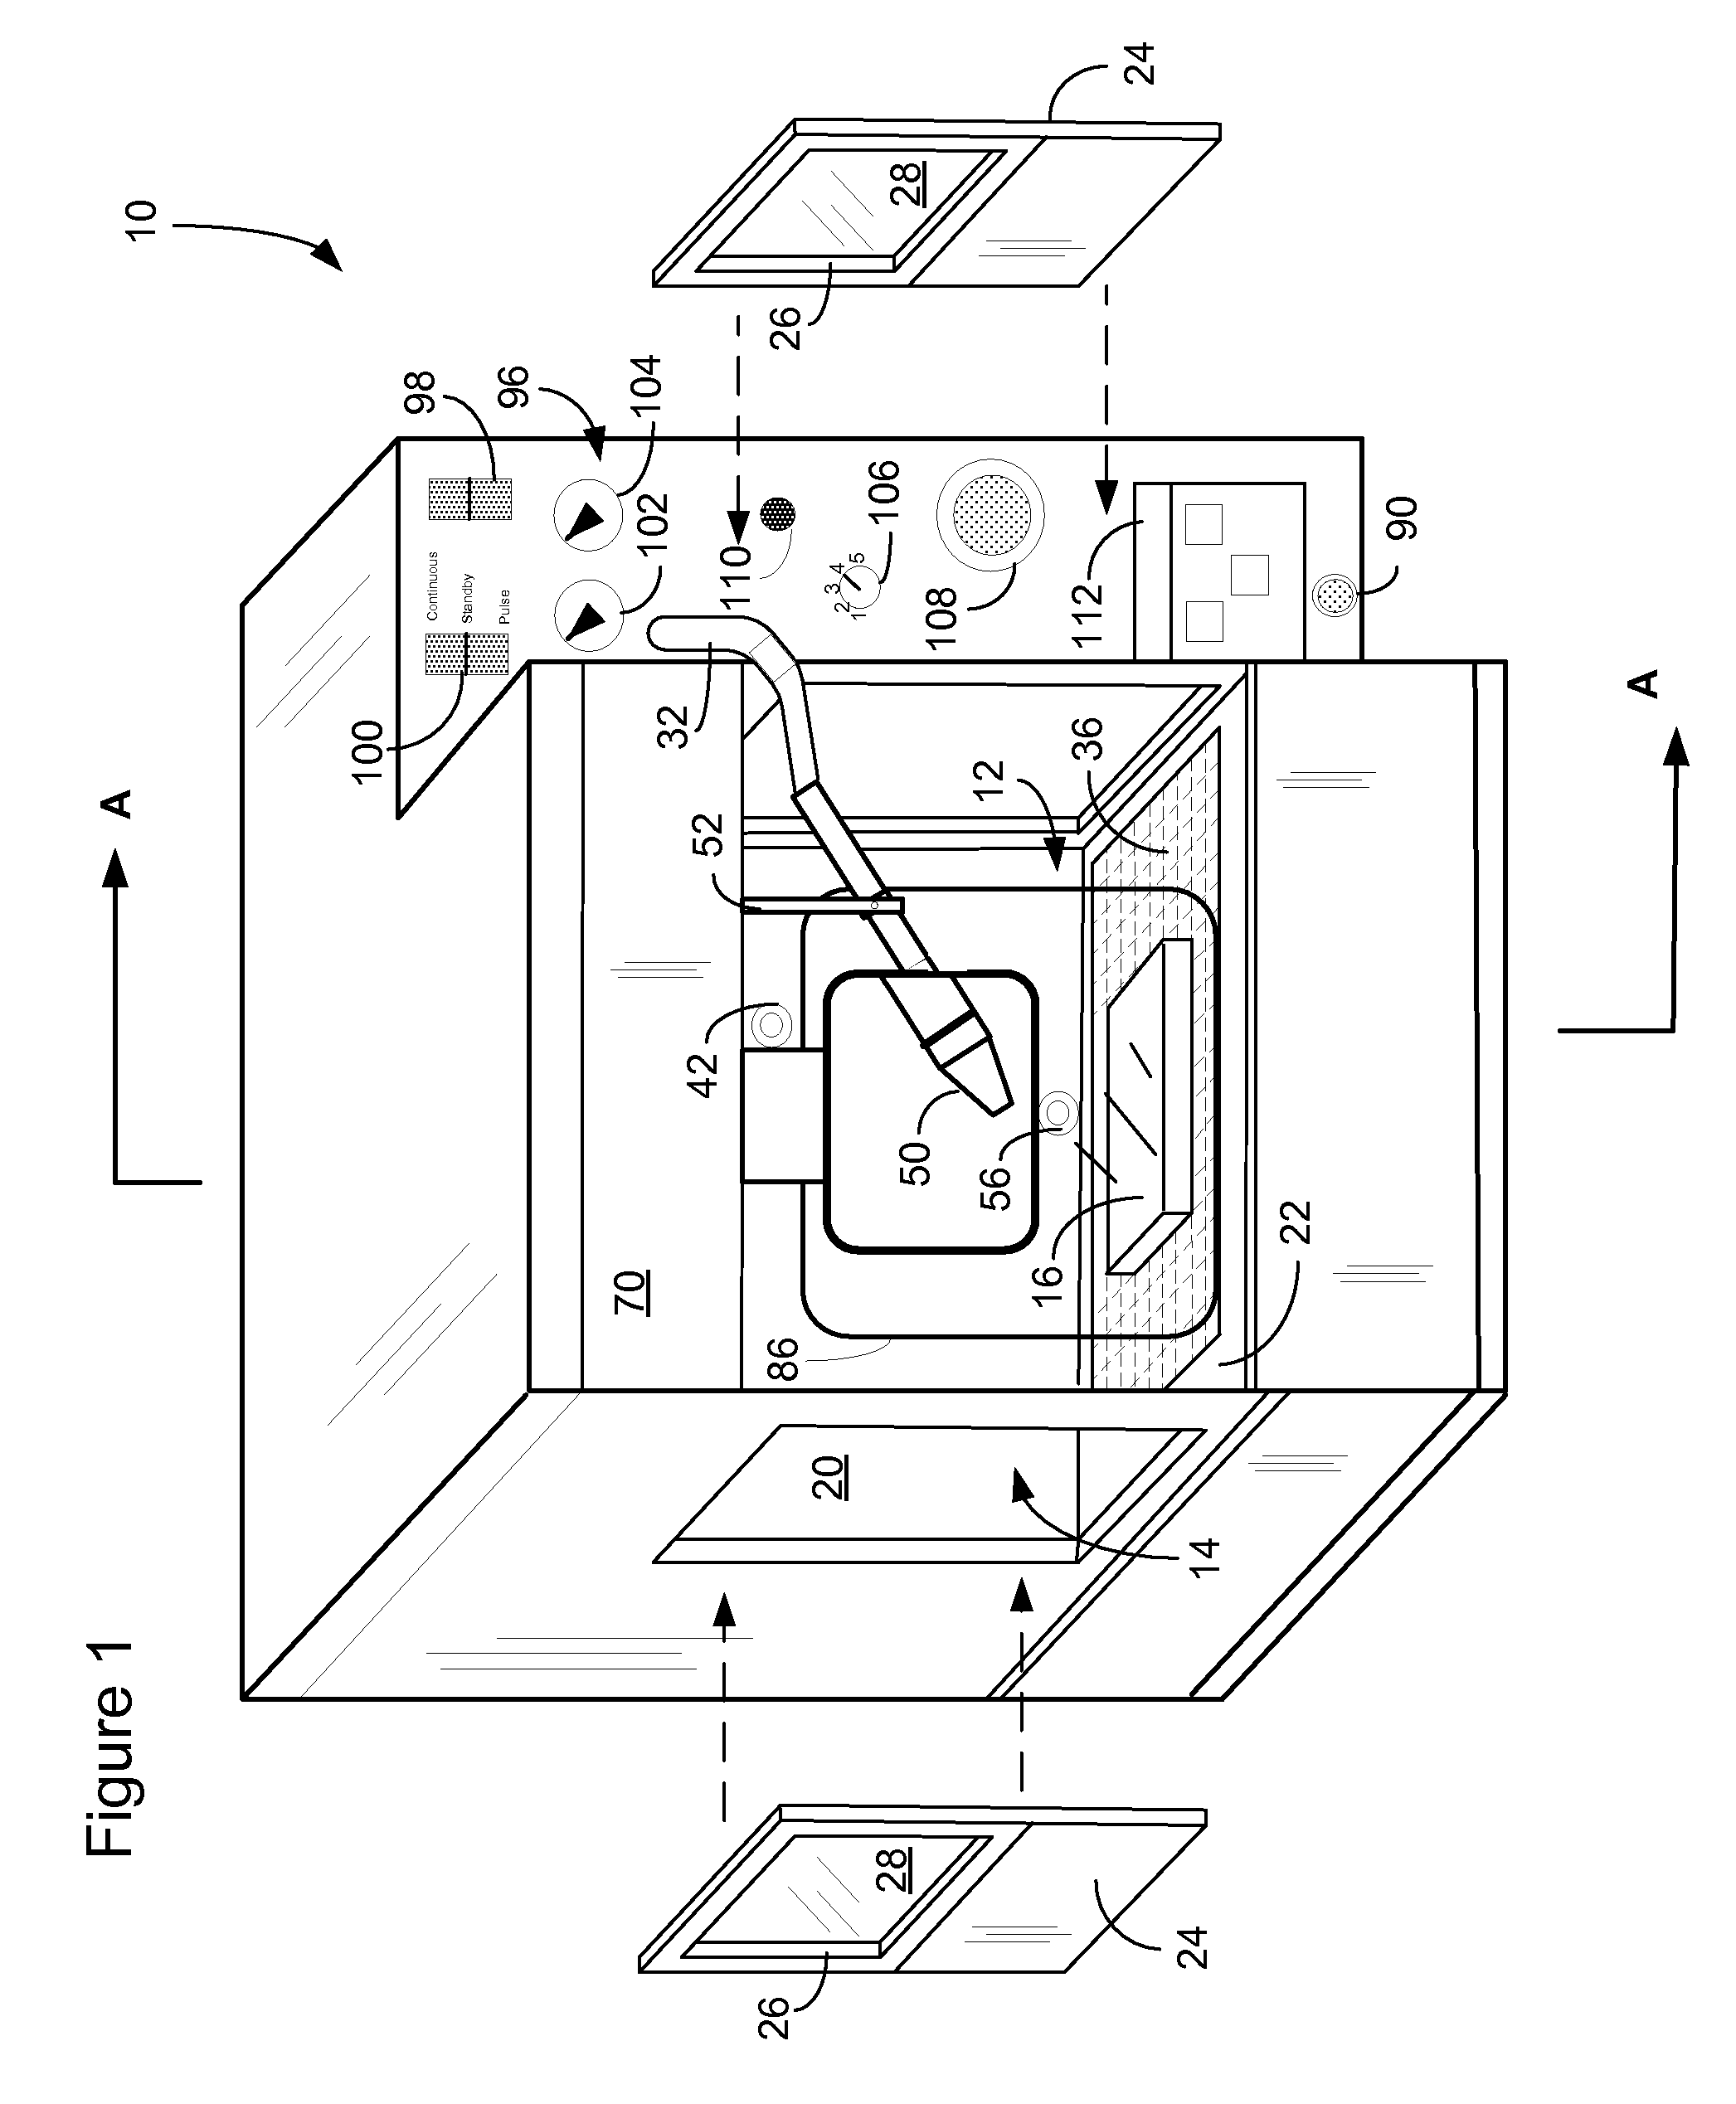 Apparatus to treat and inspect a substrate